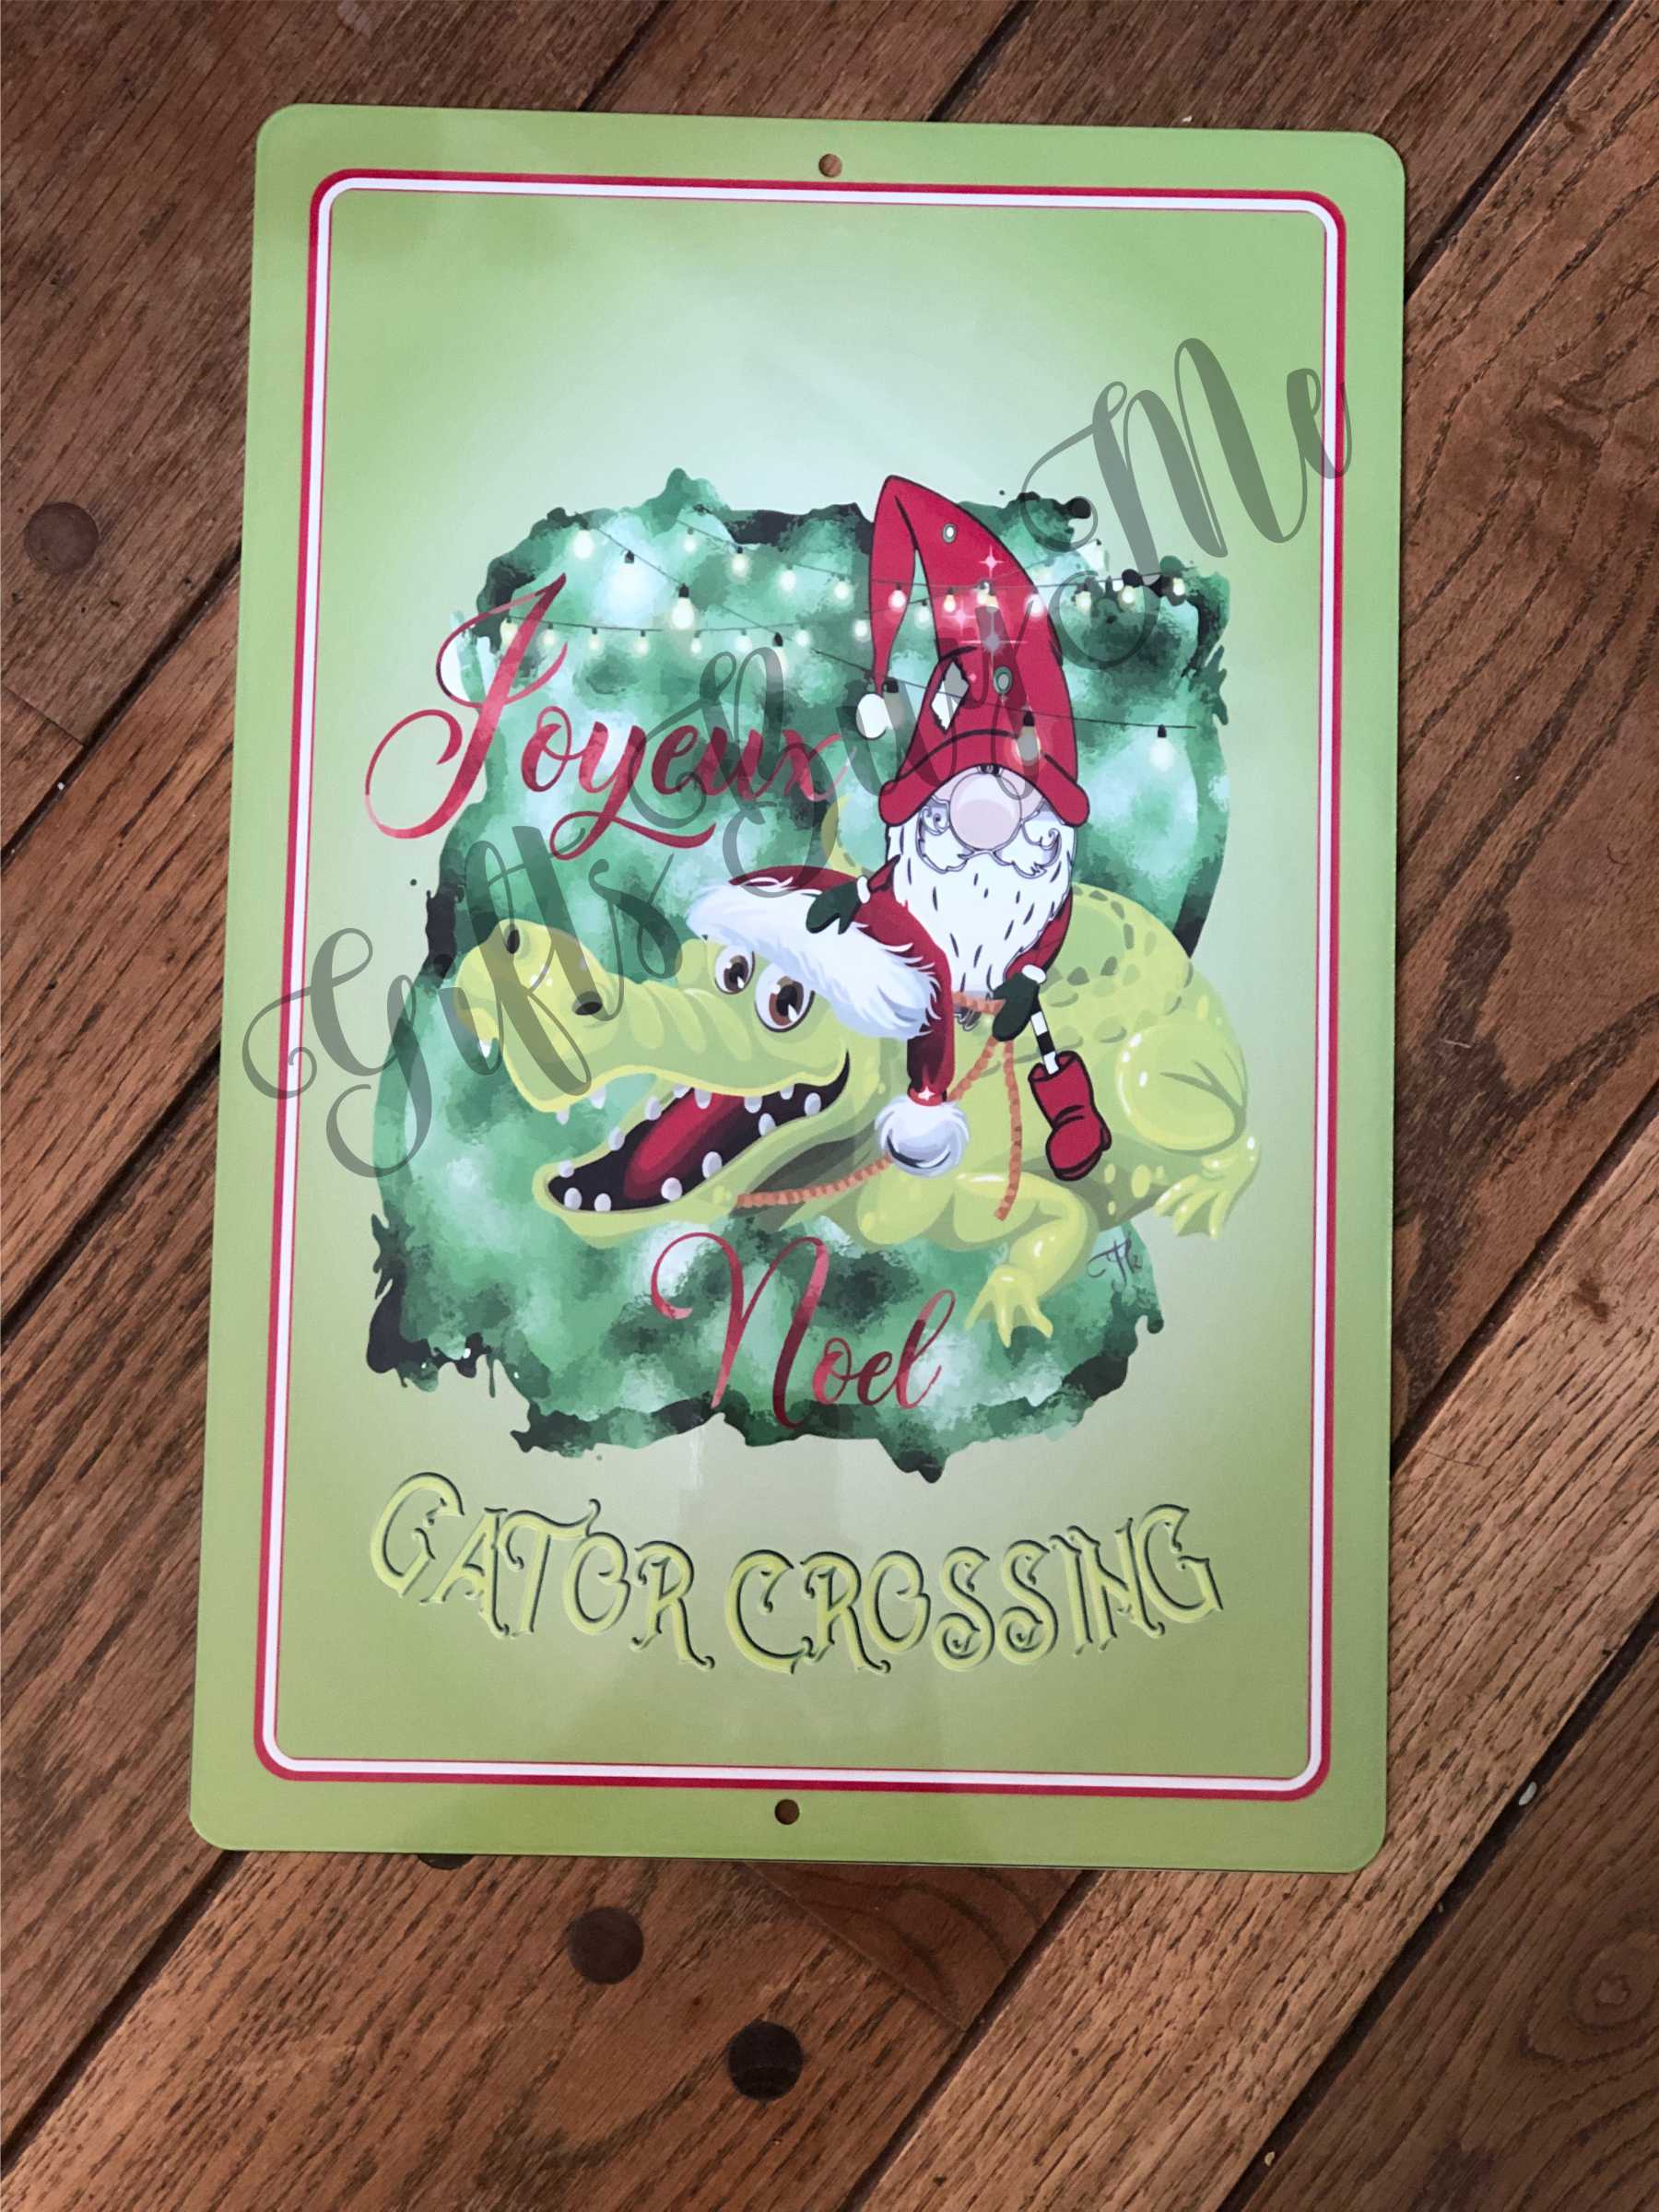 Gator Crossing made with sublimation printing